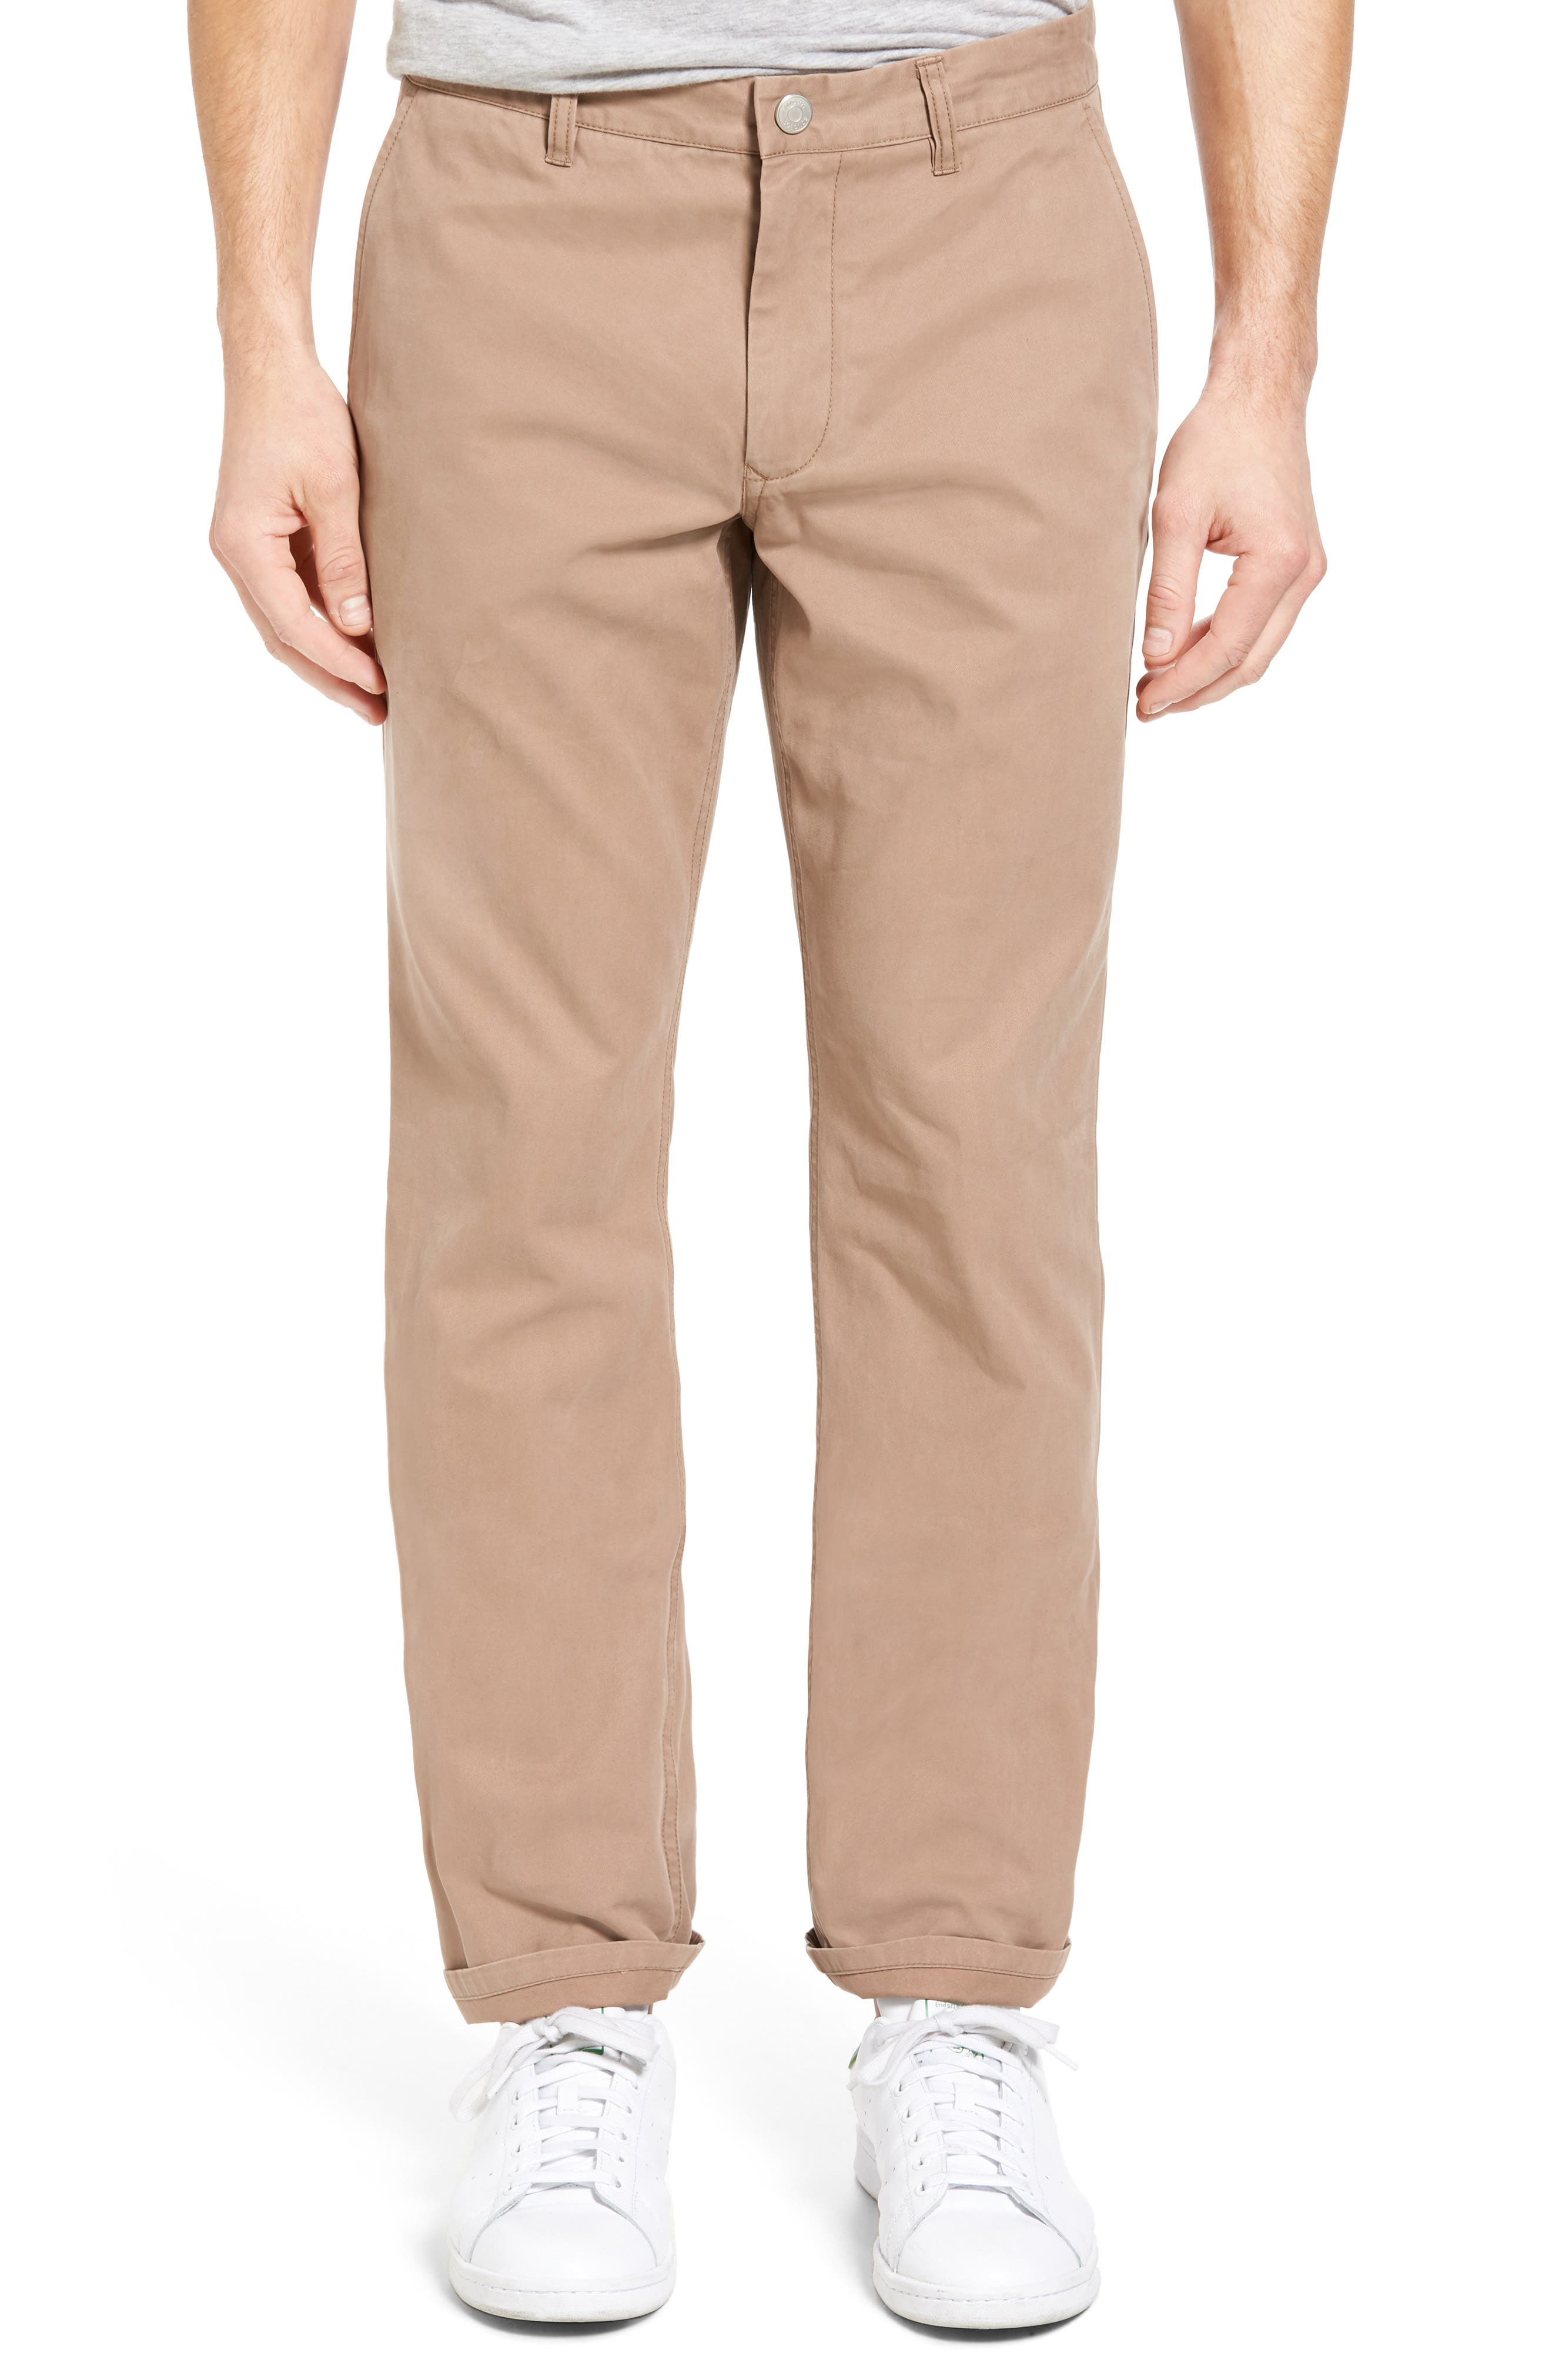 BONOBOS STRAIGHT FIT WASHED CHINOS,986893128208